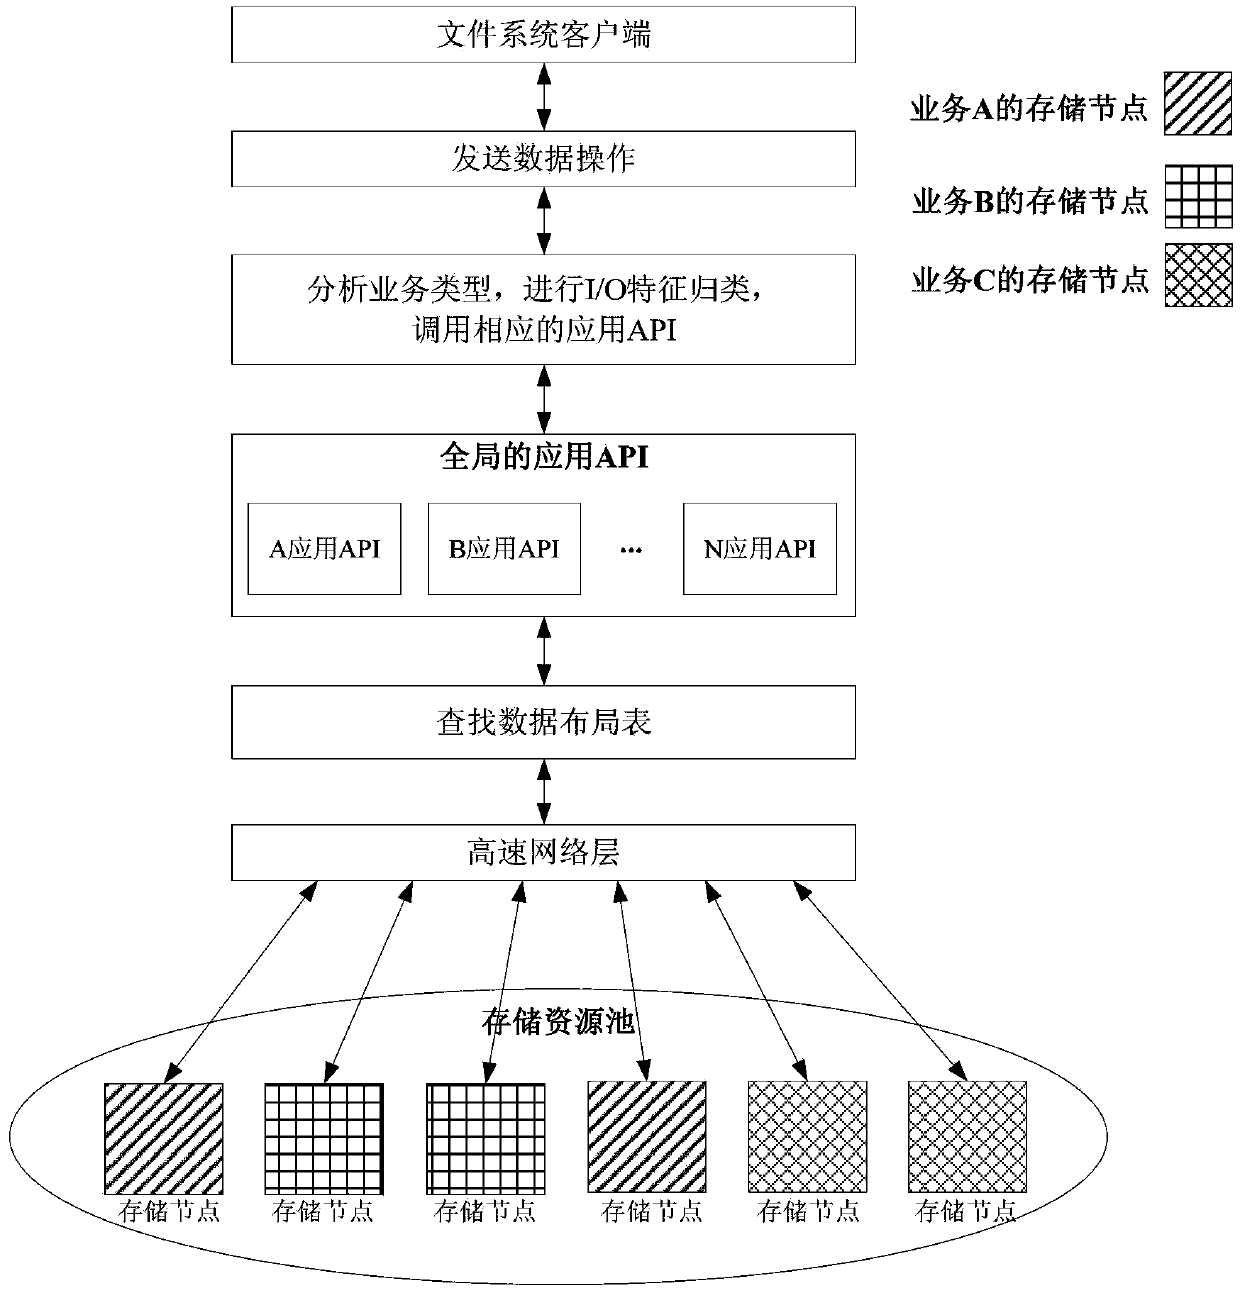 A cloud storage data distribution method for multi-service applications